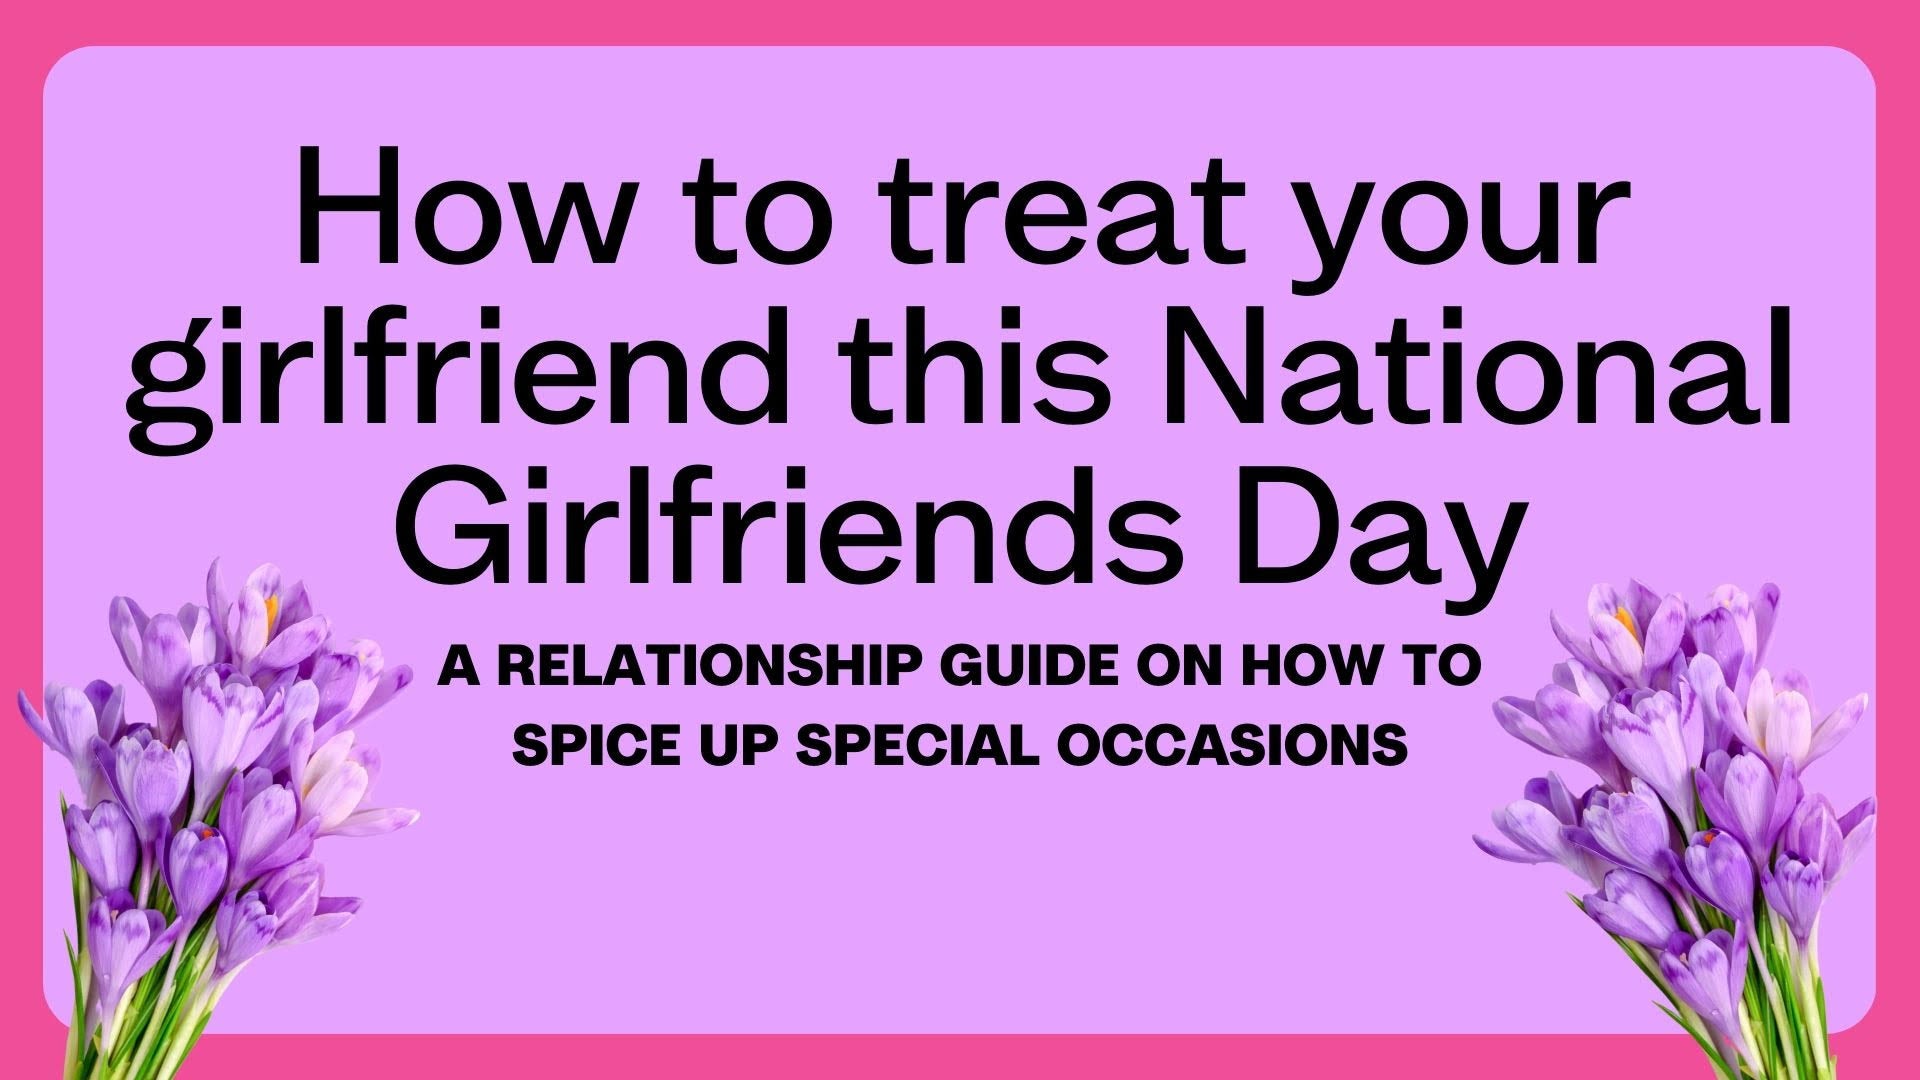 How to treat your girlfriend this National Girlfriends Day